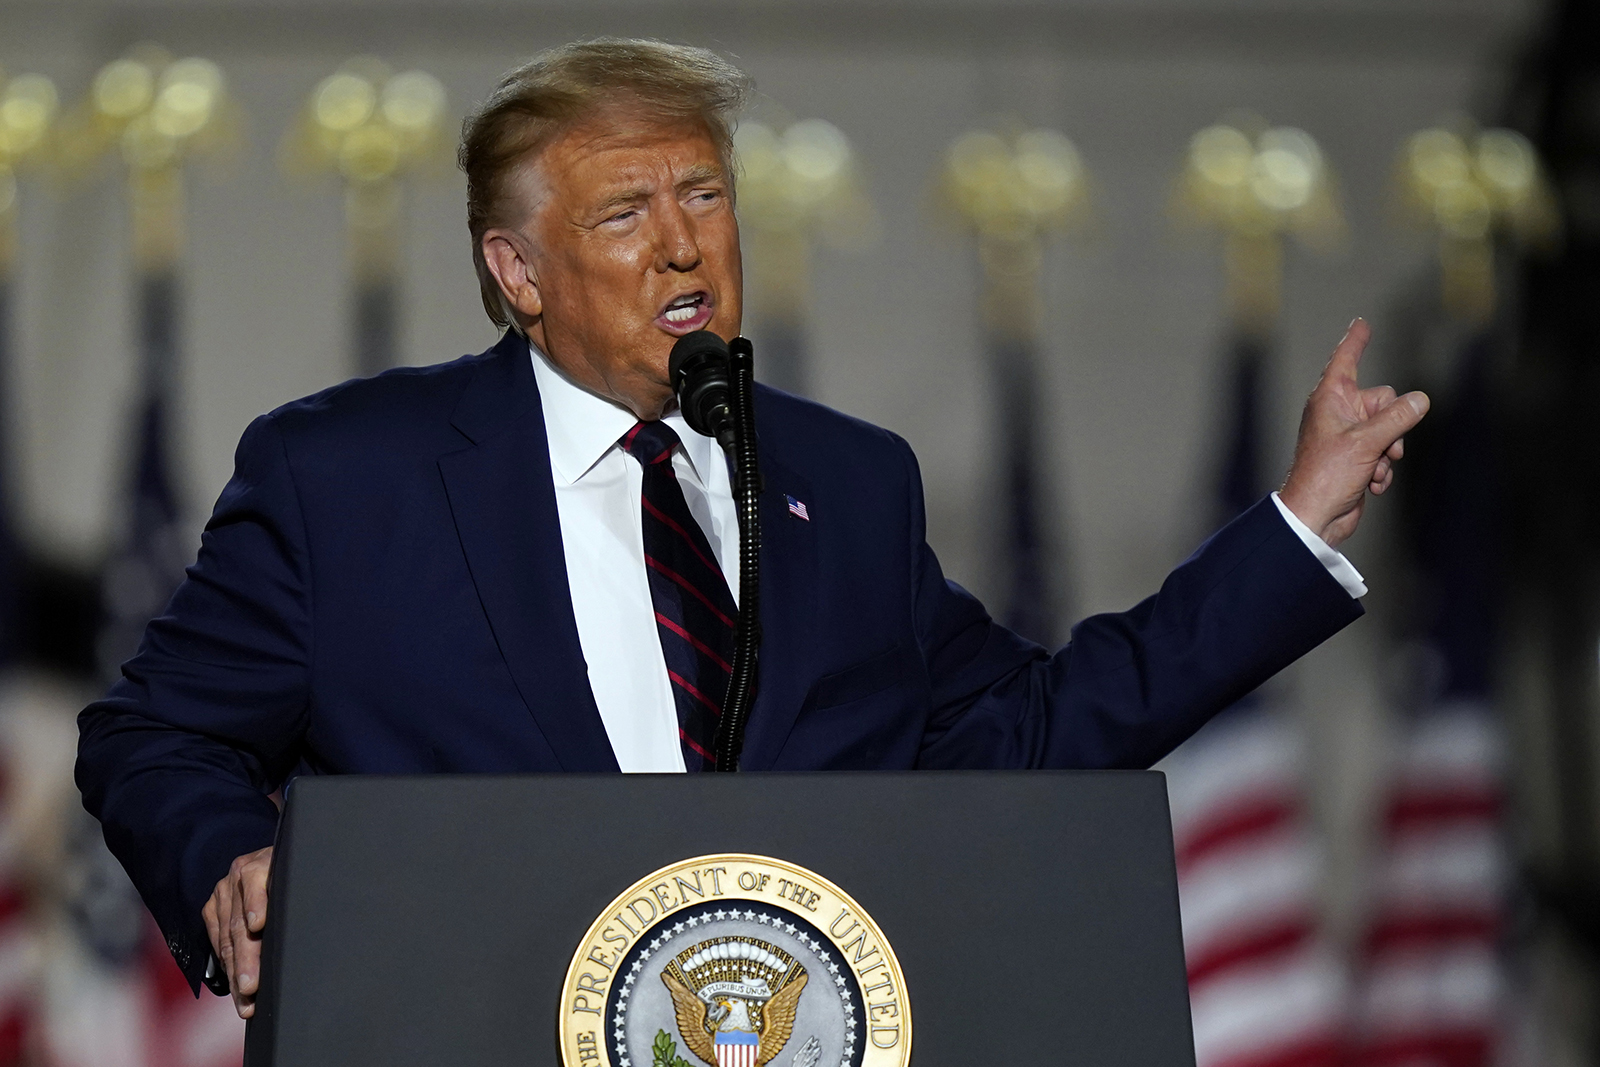 President Donald Trump speaks from the South Lawn of the White House on the fourth day of the Republican National Convention on Thursday in Washington.